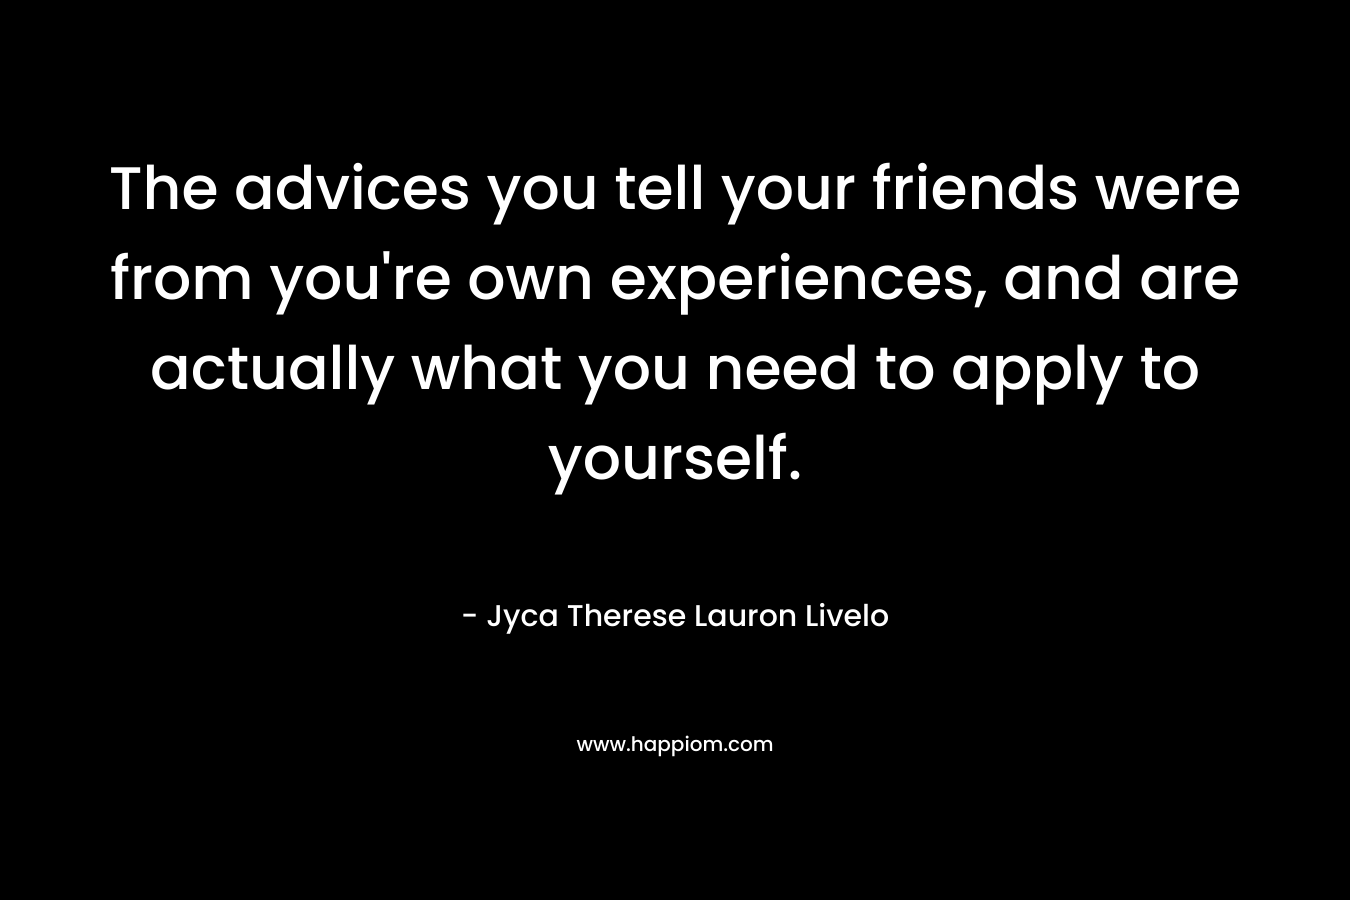 The advices you tell your friends were from you're own experiences, and are actually what you need to apply to yourself.